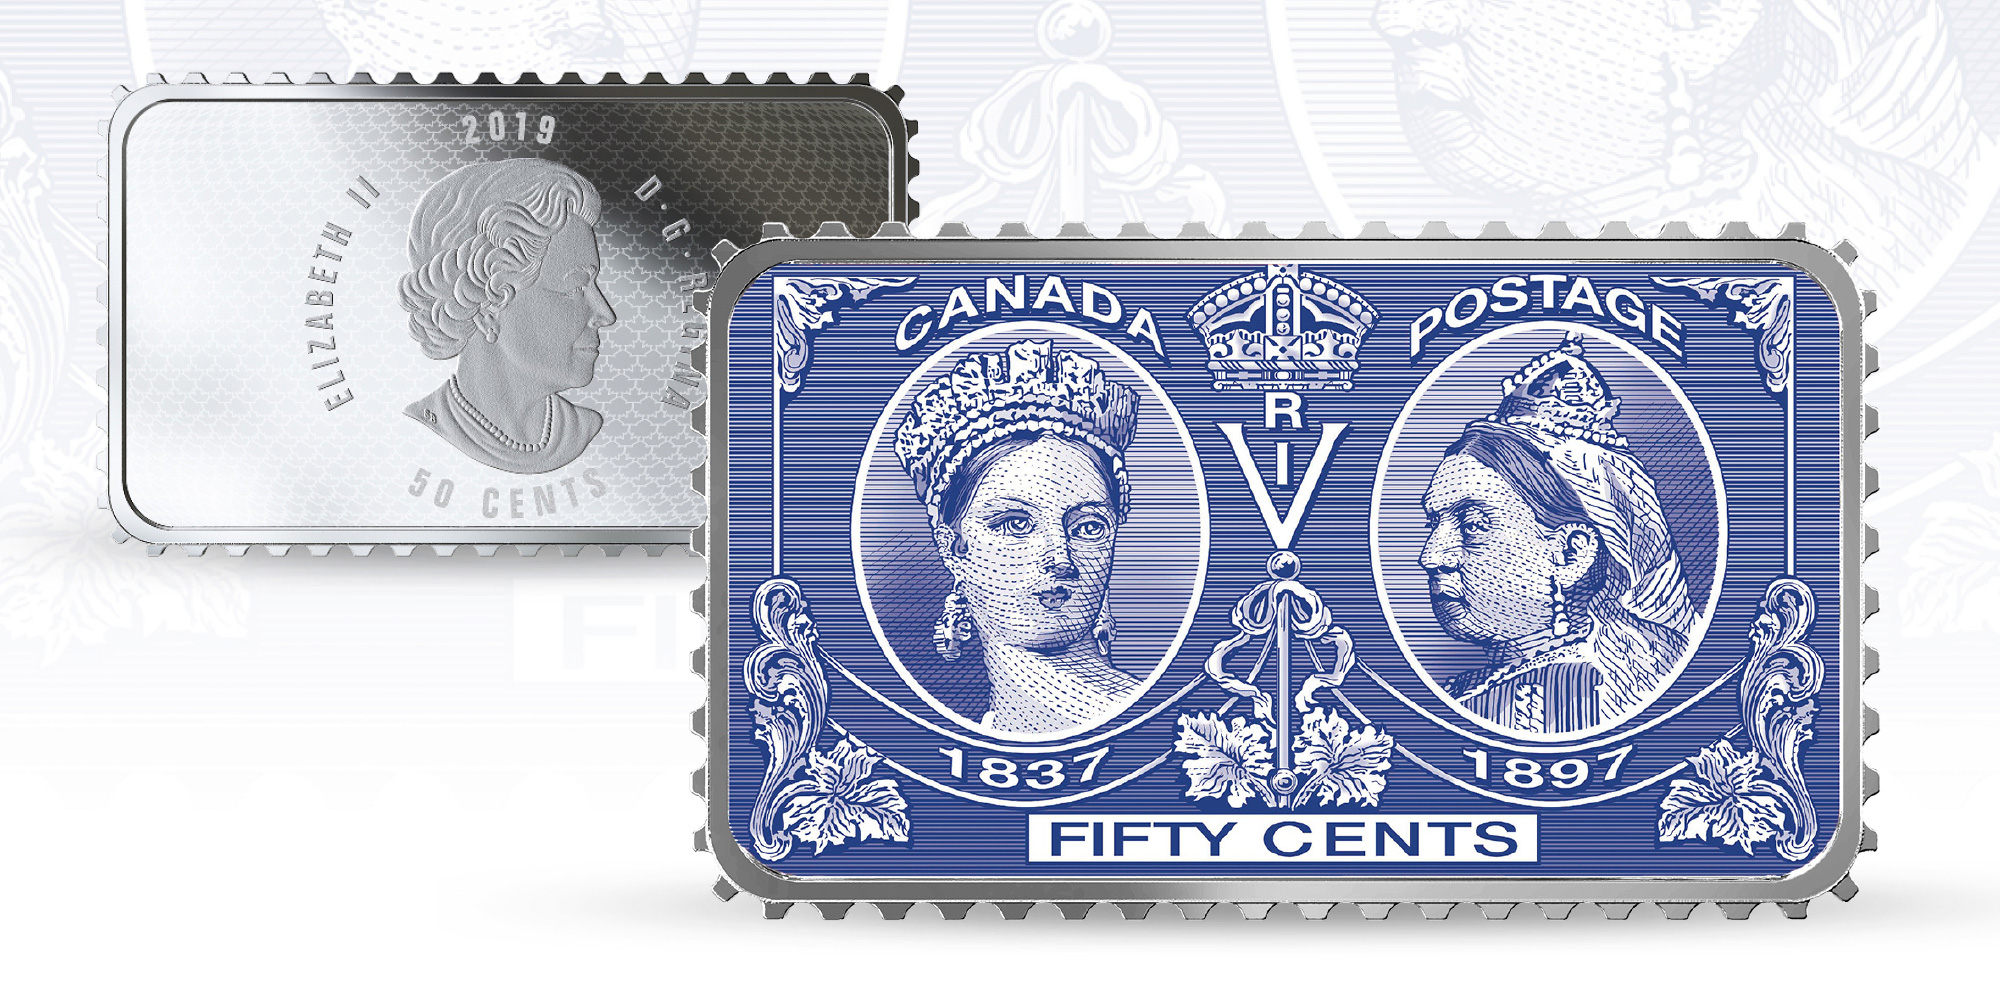 The 1897 “Jubilee” commemorative stamp, considered by many collectors to be the Dominion of Canada’s first commemorative stamp, quickly sold-out upon its release in 1897 and was a testament to Her Majesty’s popularity among Canadians. The 2019 50-cent fine silver coin matches the deep royal blue that first caught the Mint’s attention and is engraved with horizontal lines like those produced by intaglio printing. Even its edge is serrated to give it a real postage stamp feel.